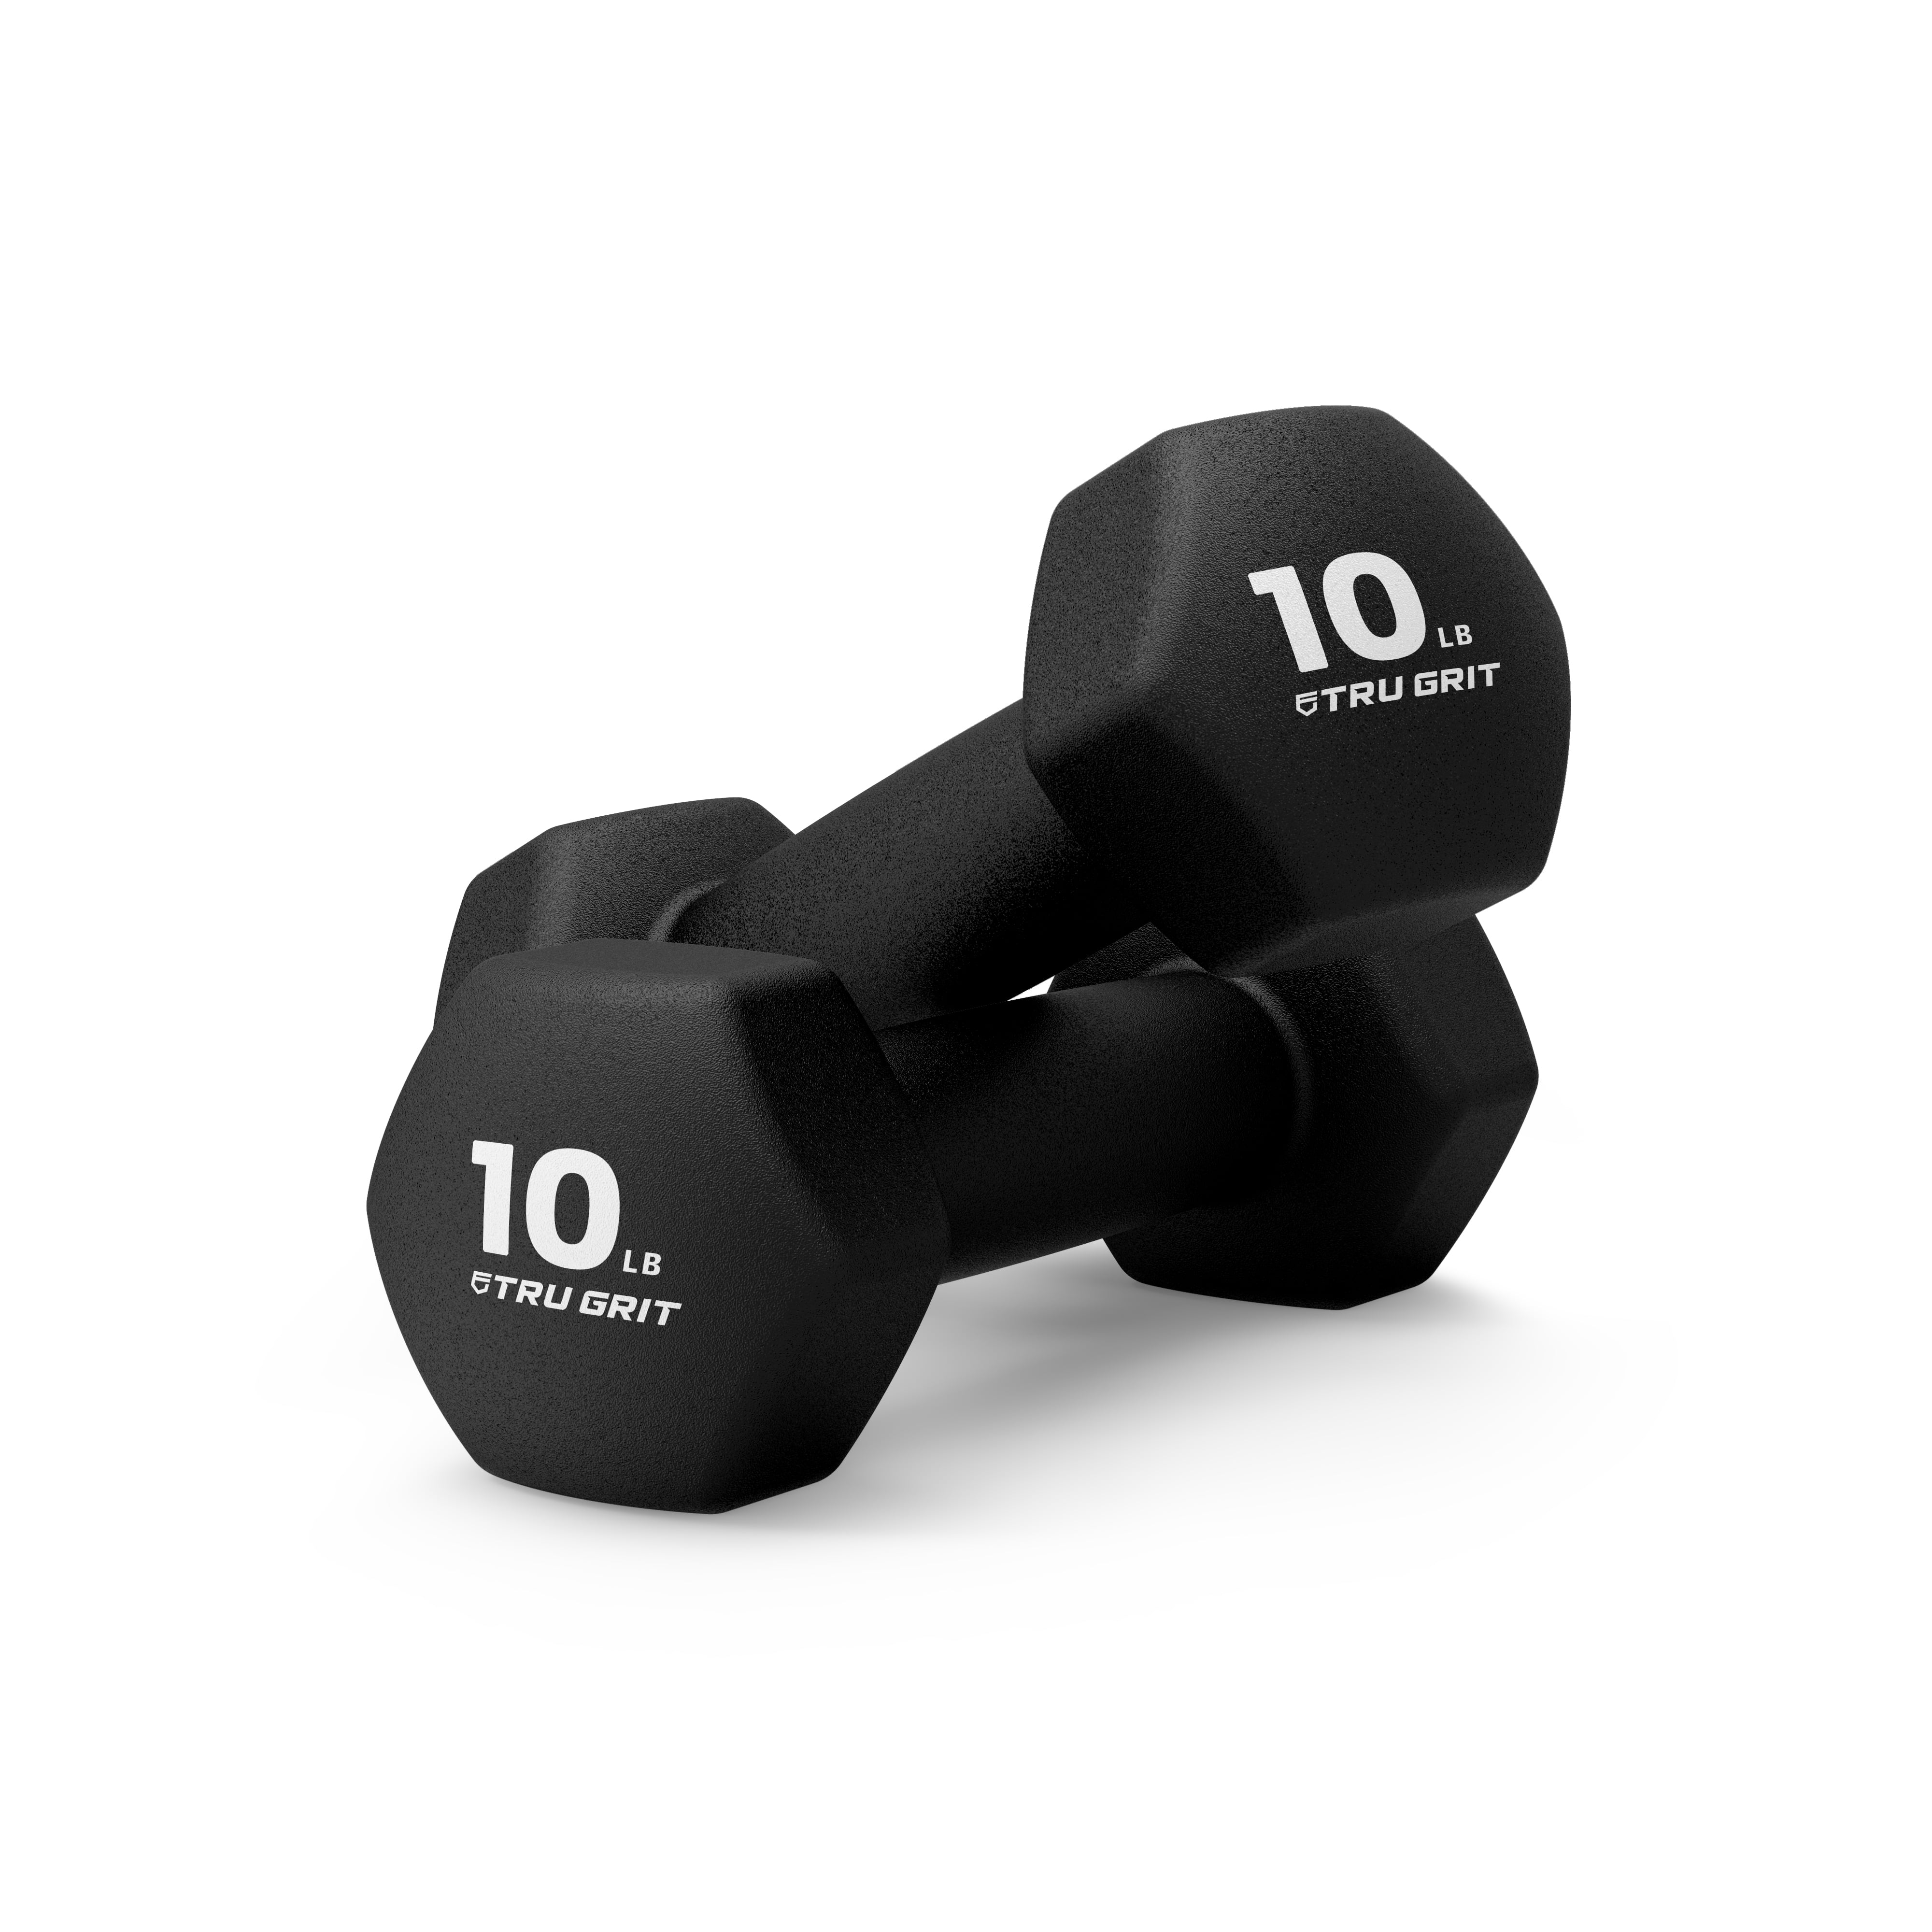 2 lb dumbells CAP Hex Neoprene Dumbbells Set of Two Weights FREE SHIPPING NEW 